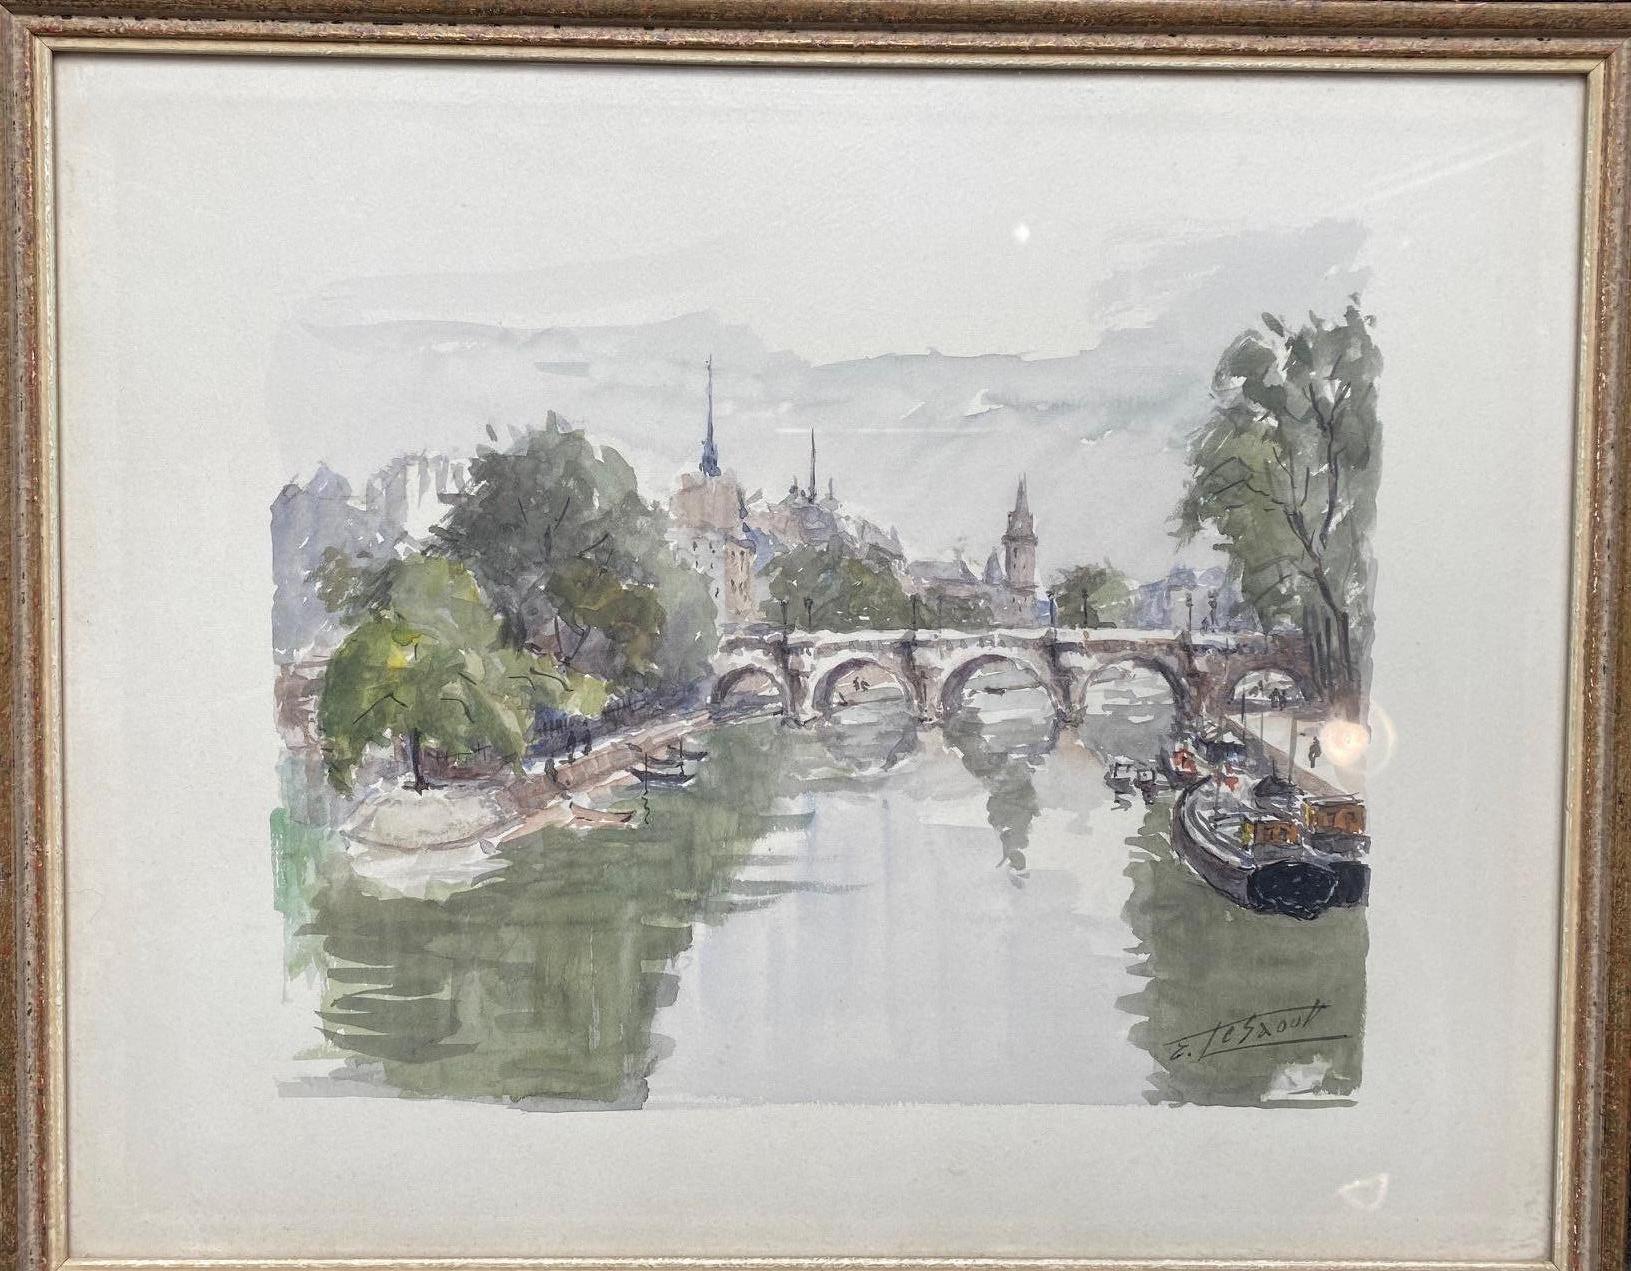 Emile Lesaout is a French artist born in 1926
The watercolor is sold with frame 
Wooden frame with glass size 32x40 cm